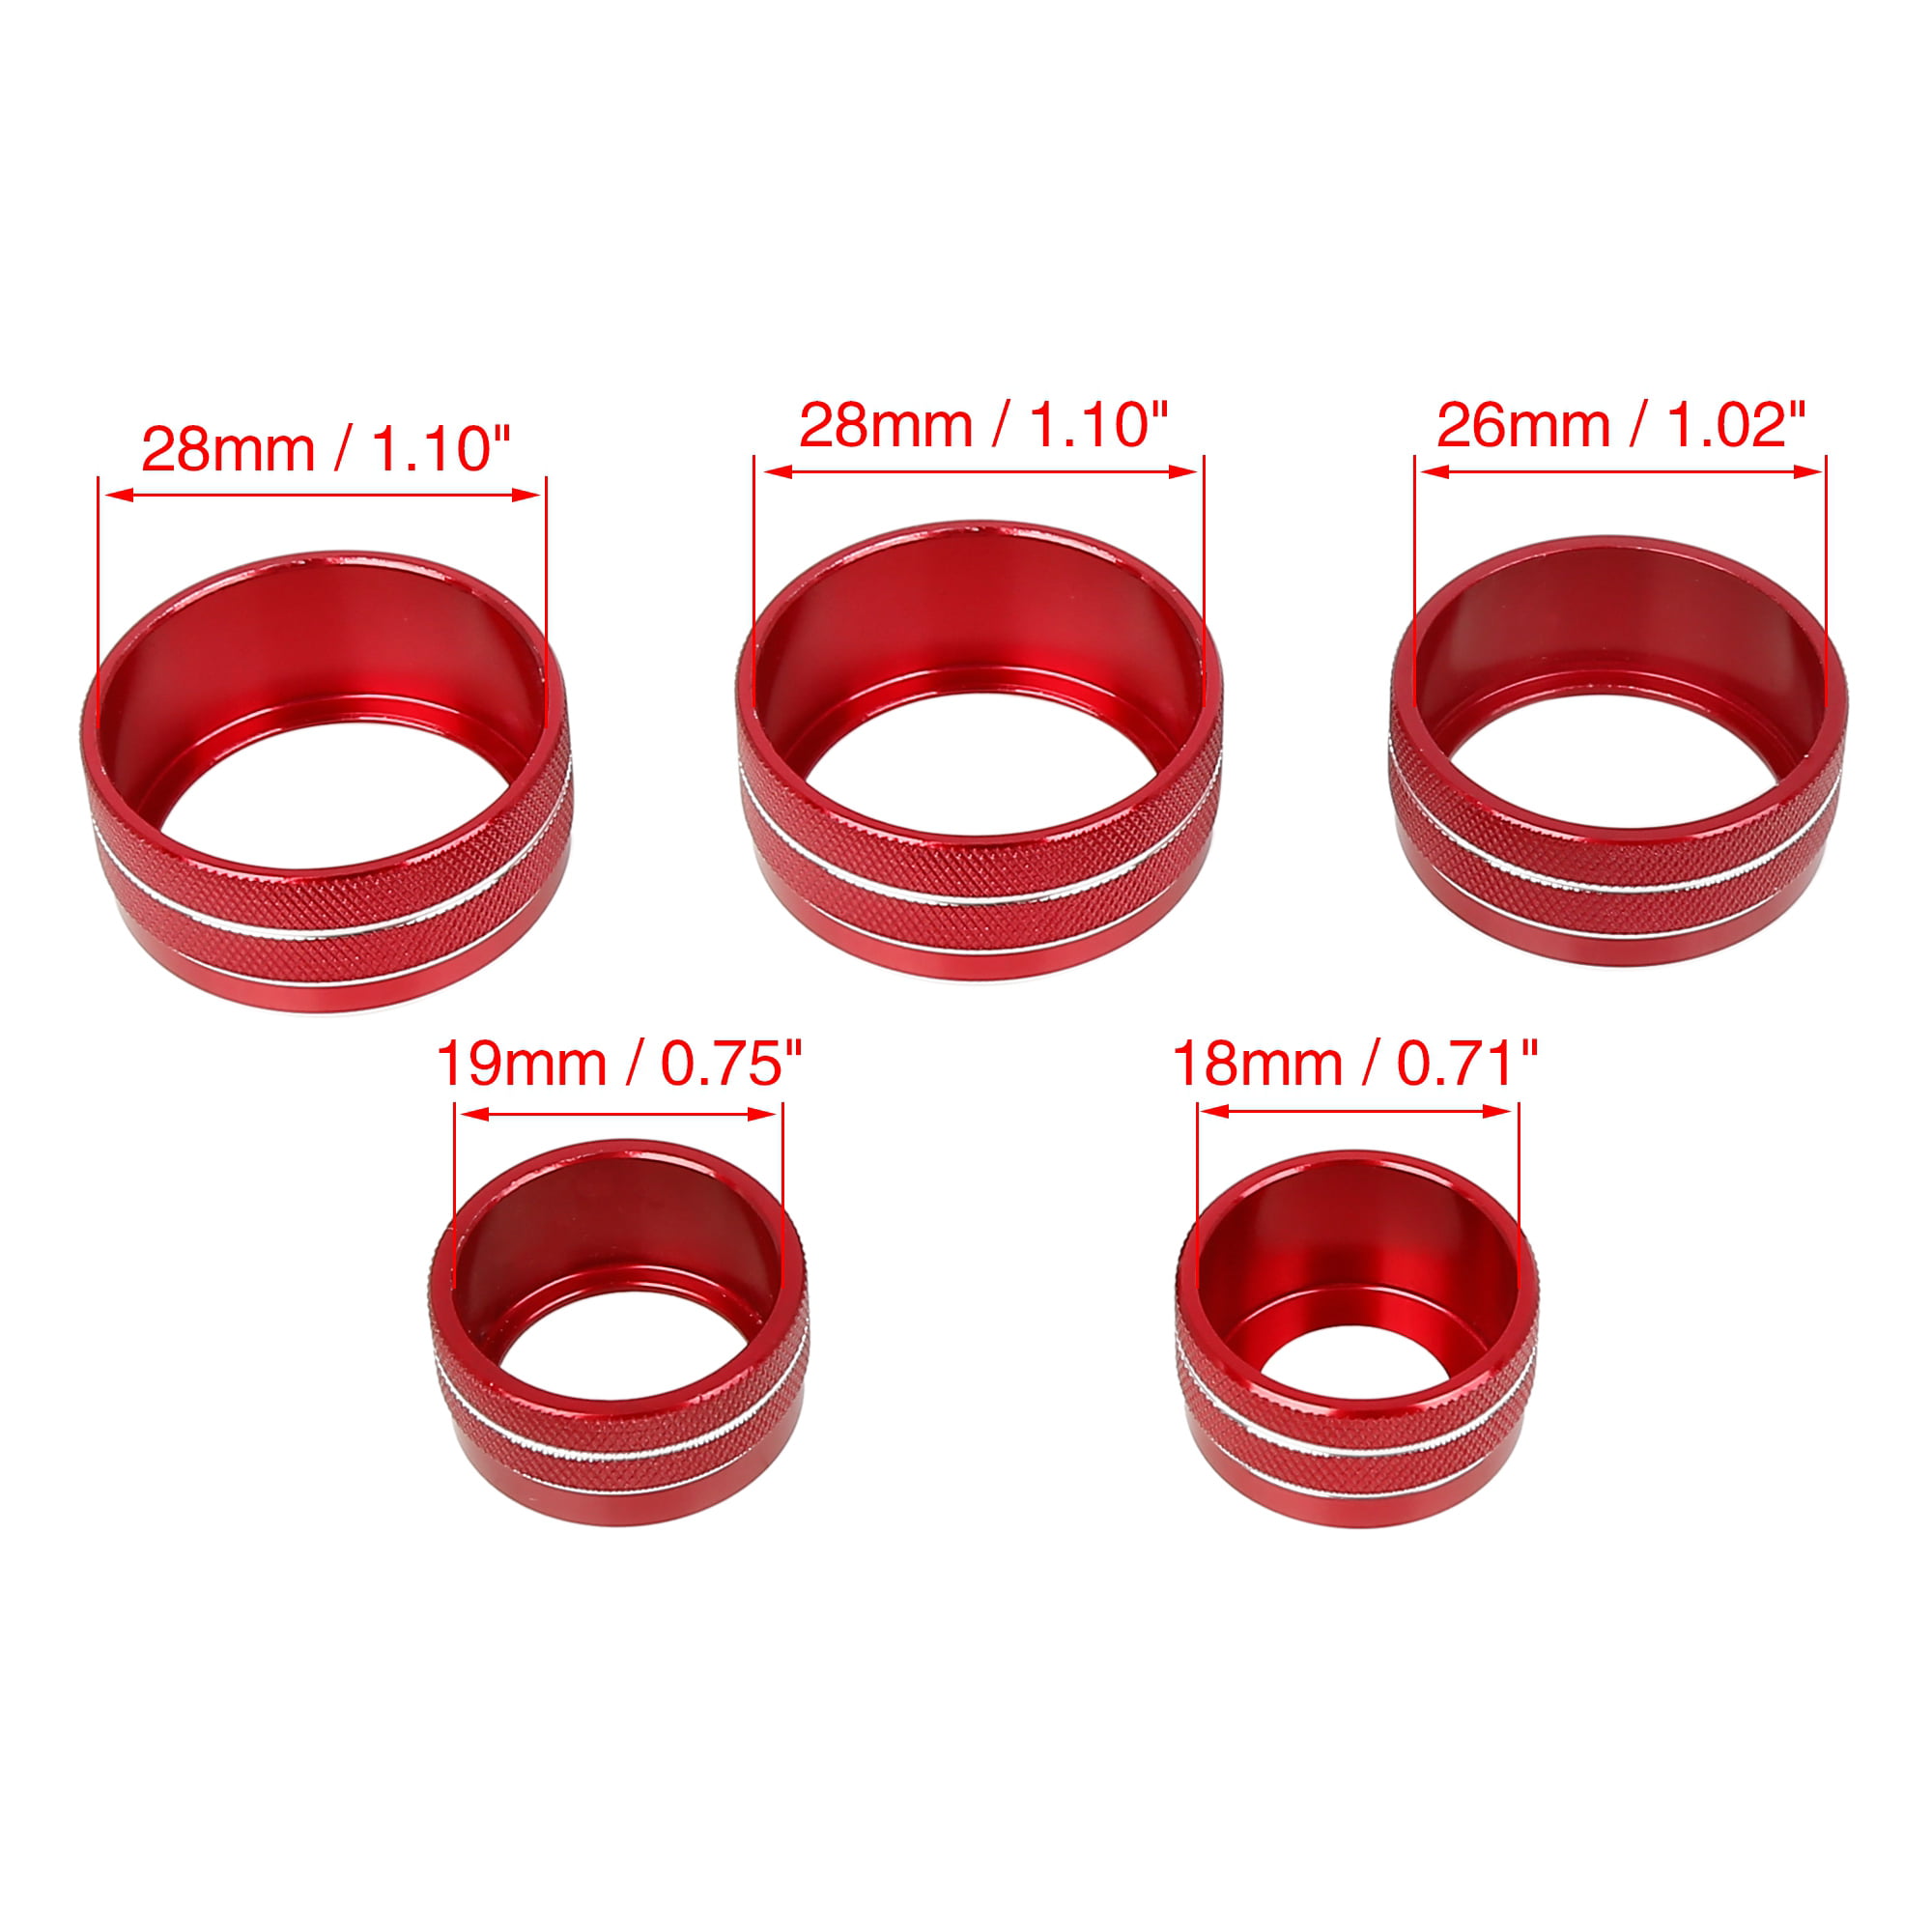 X AUTOHAUX 5pcs Red Aluminum Alloy Car AC Climate Control Ring Knob Trim Cover for Toyota Camry 2018-2020